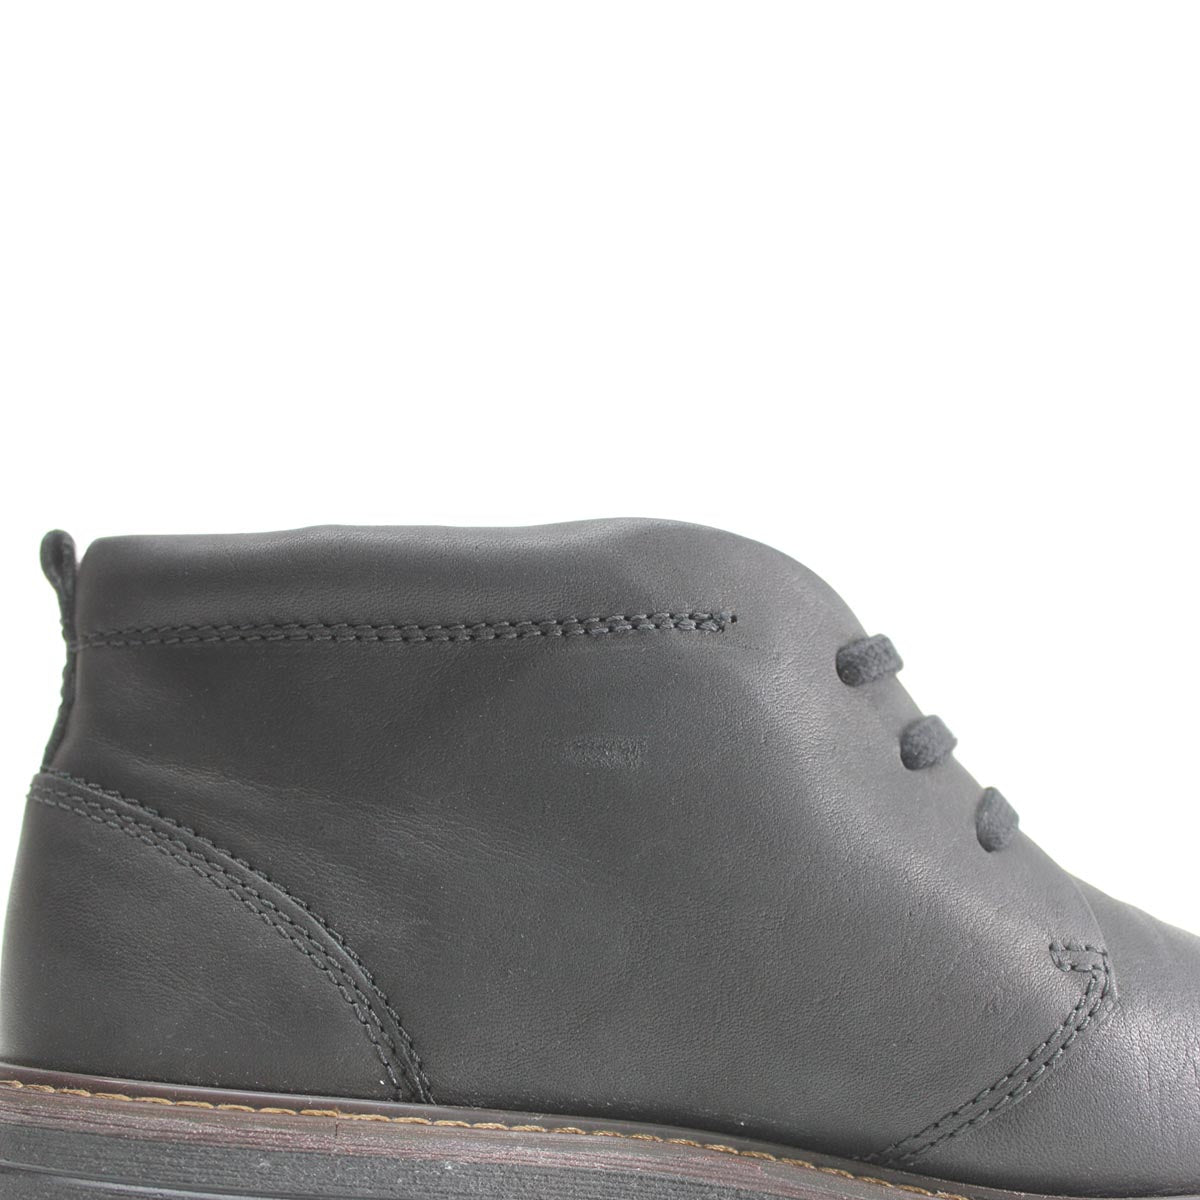 Ecco Mens Boots Turn Lace-Up Ankle Leather - UK 10.5-11